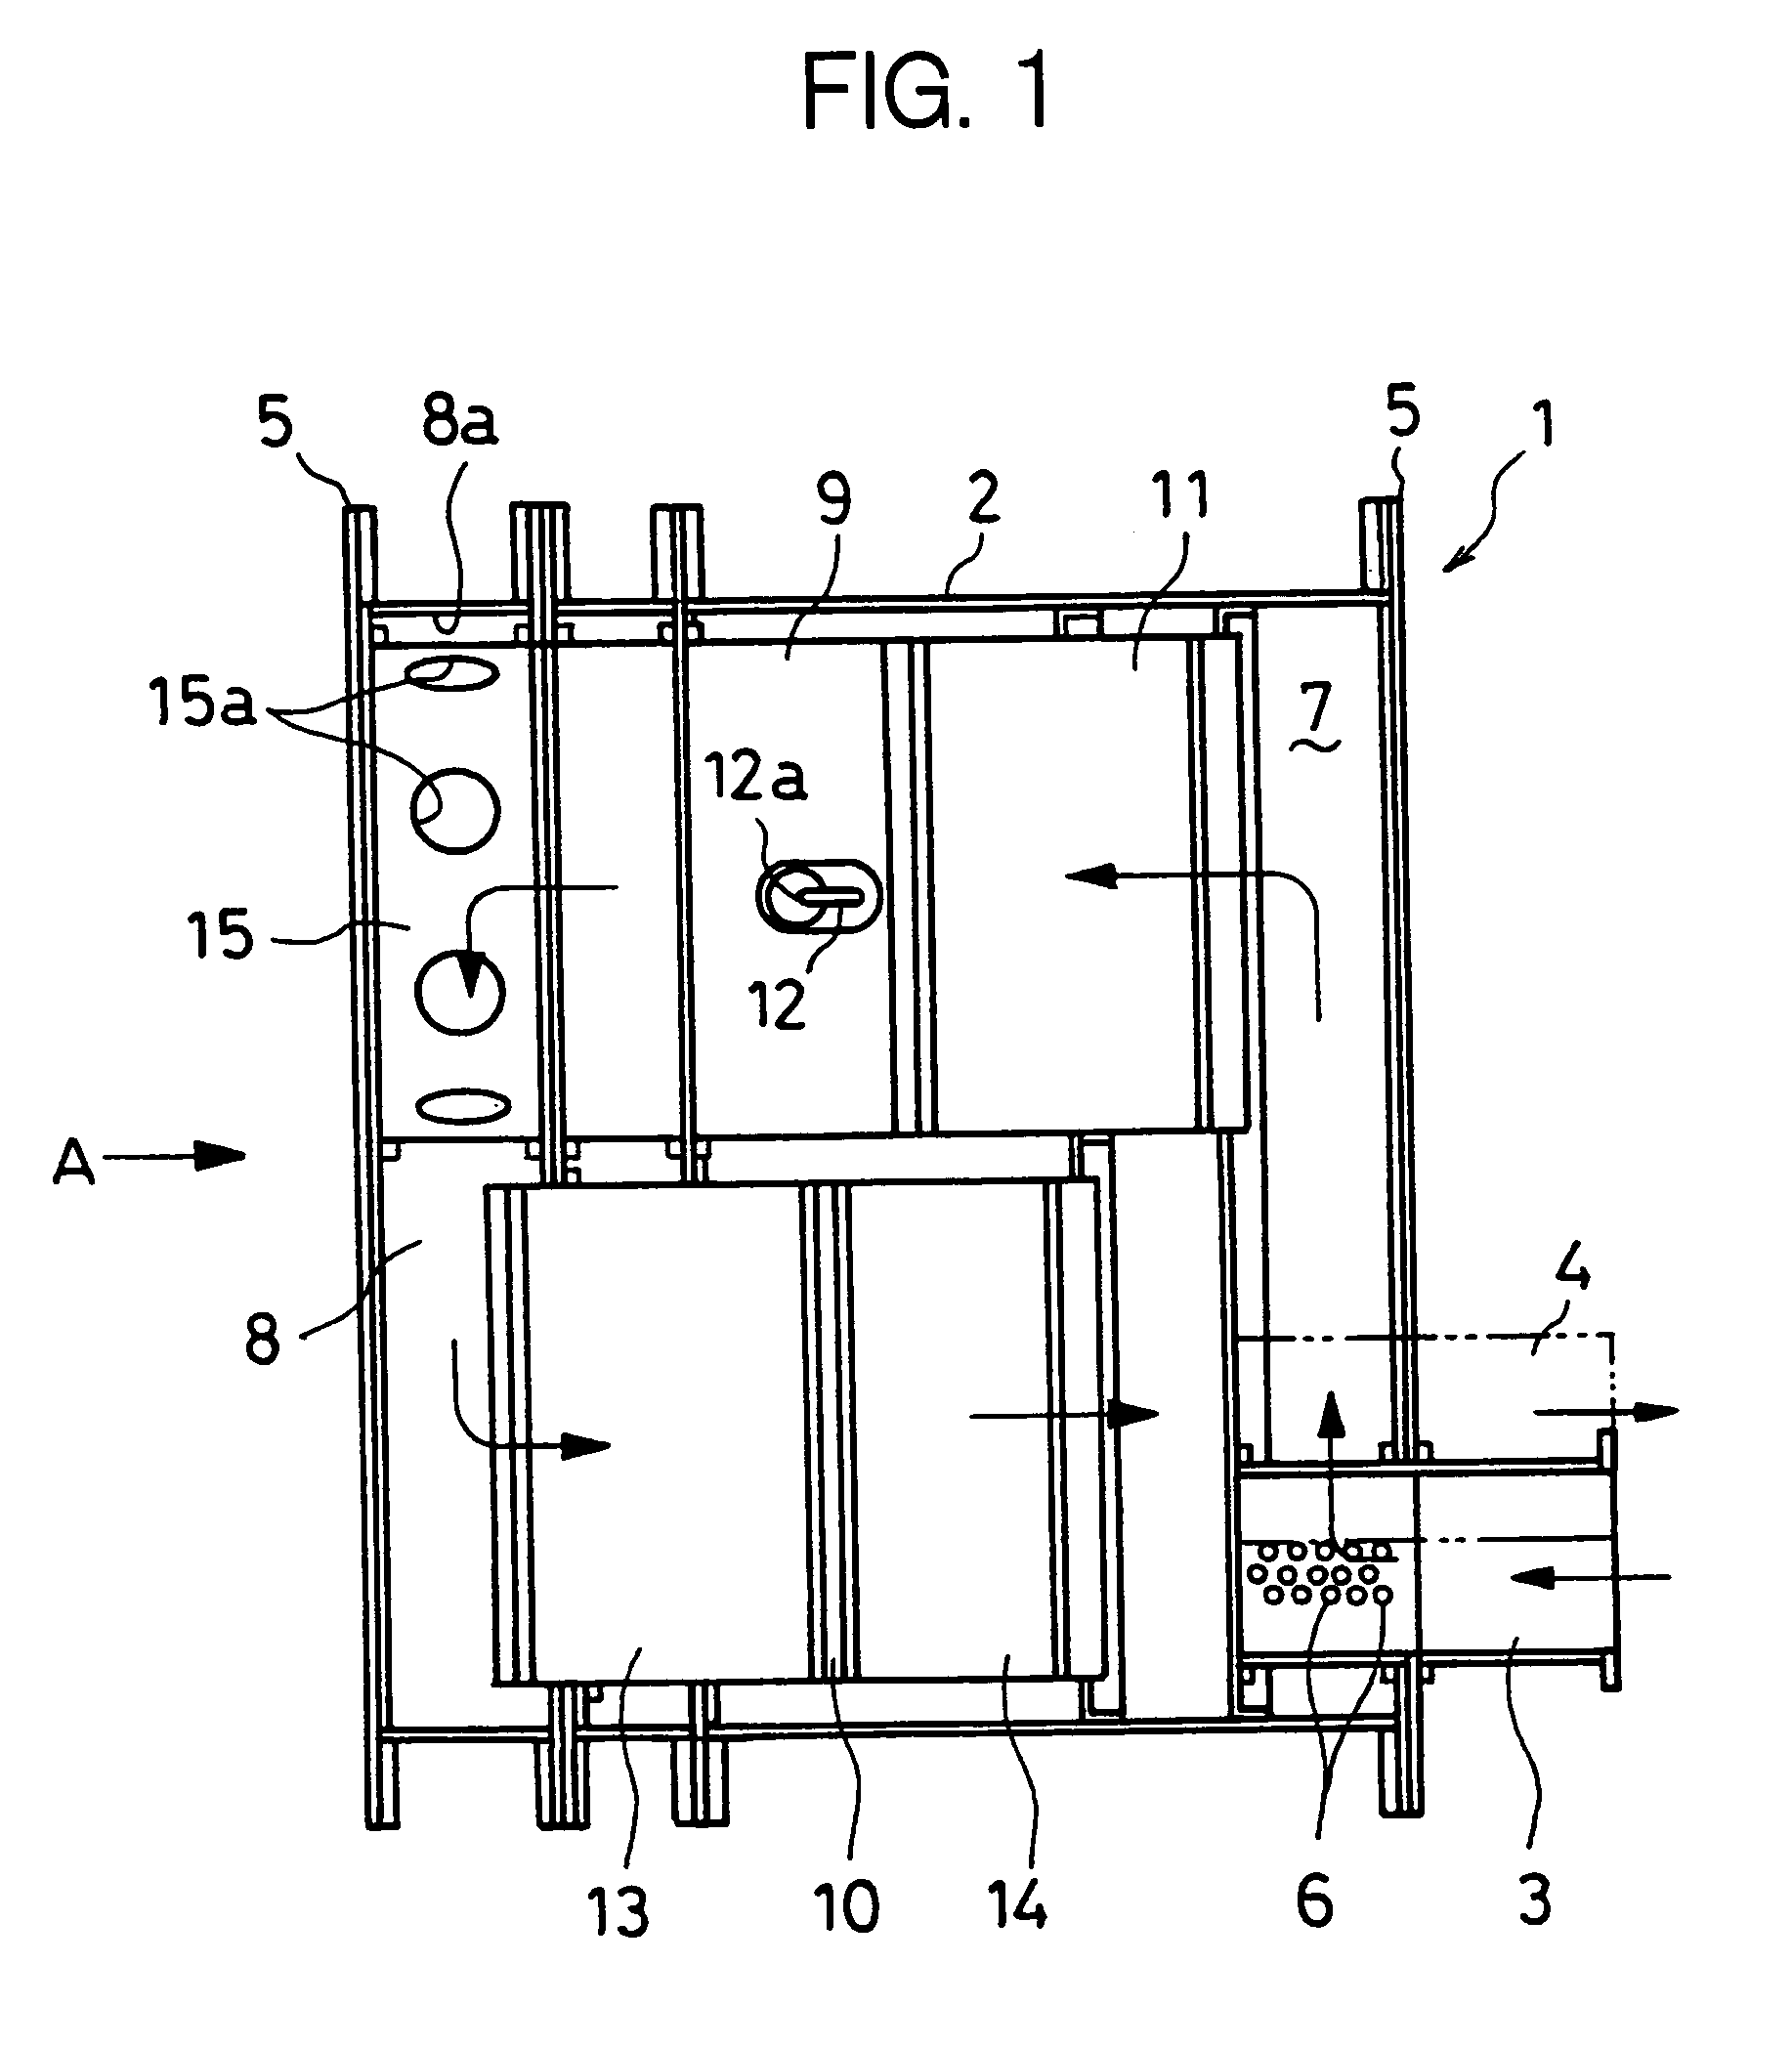 Muffling apparatus having exhaust emission purifying function